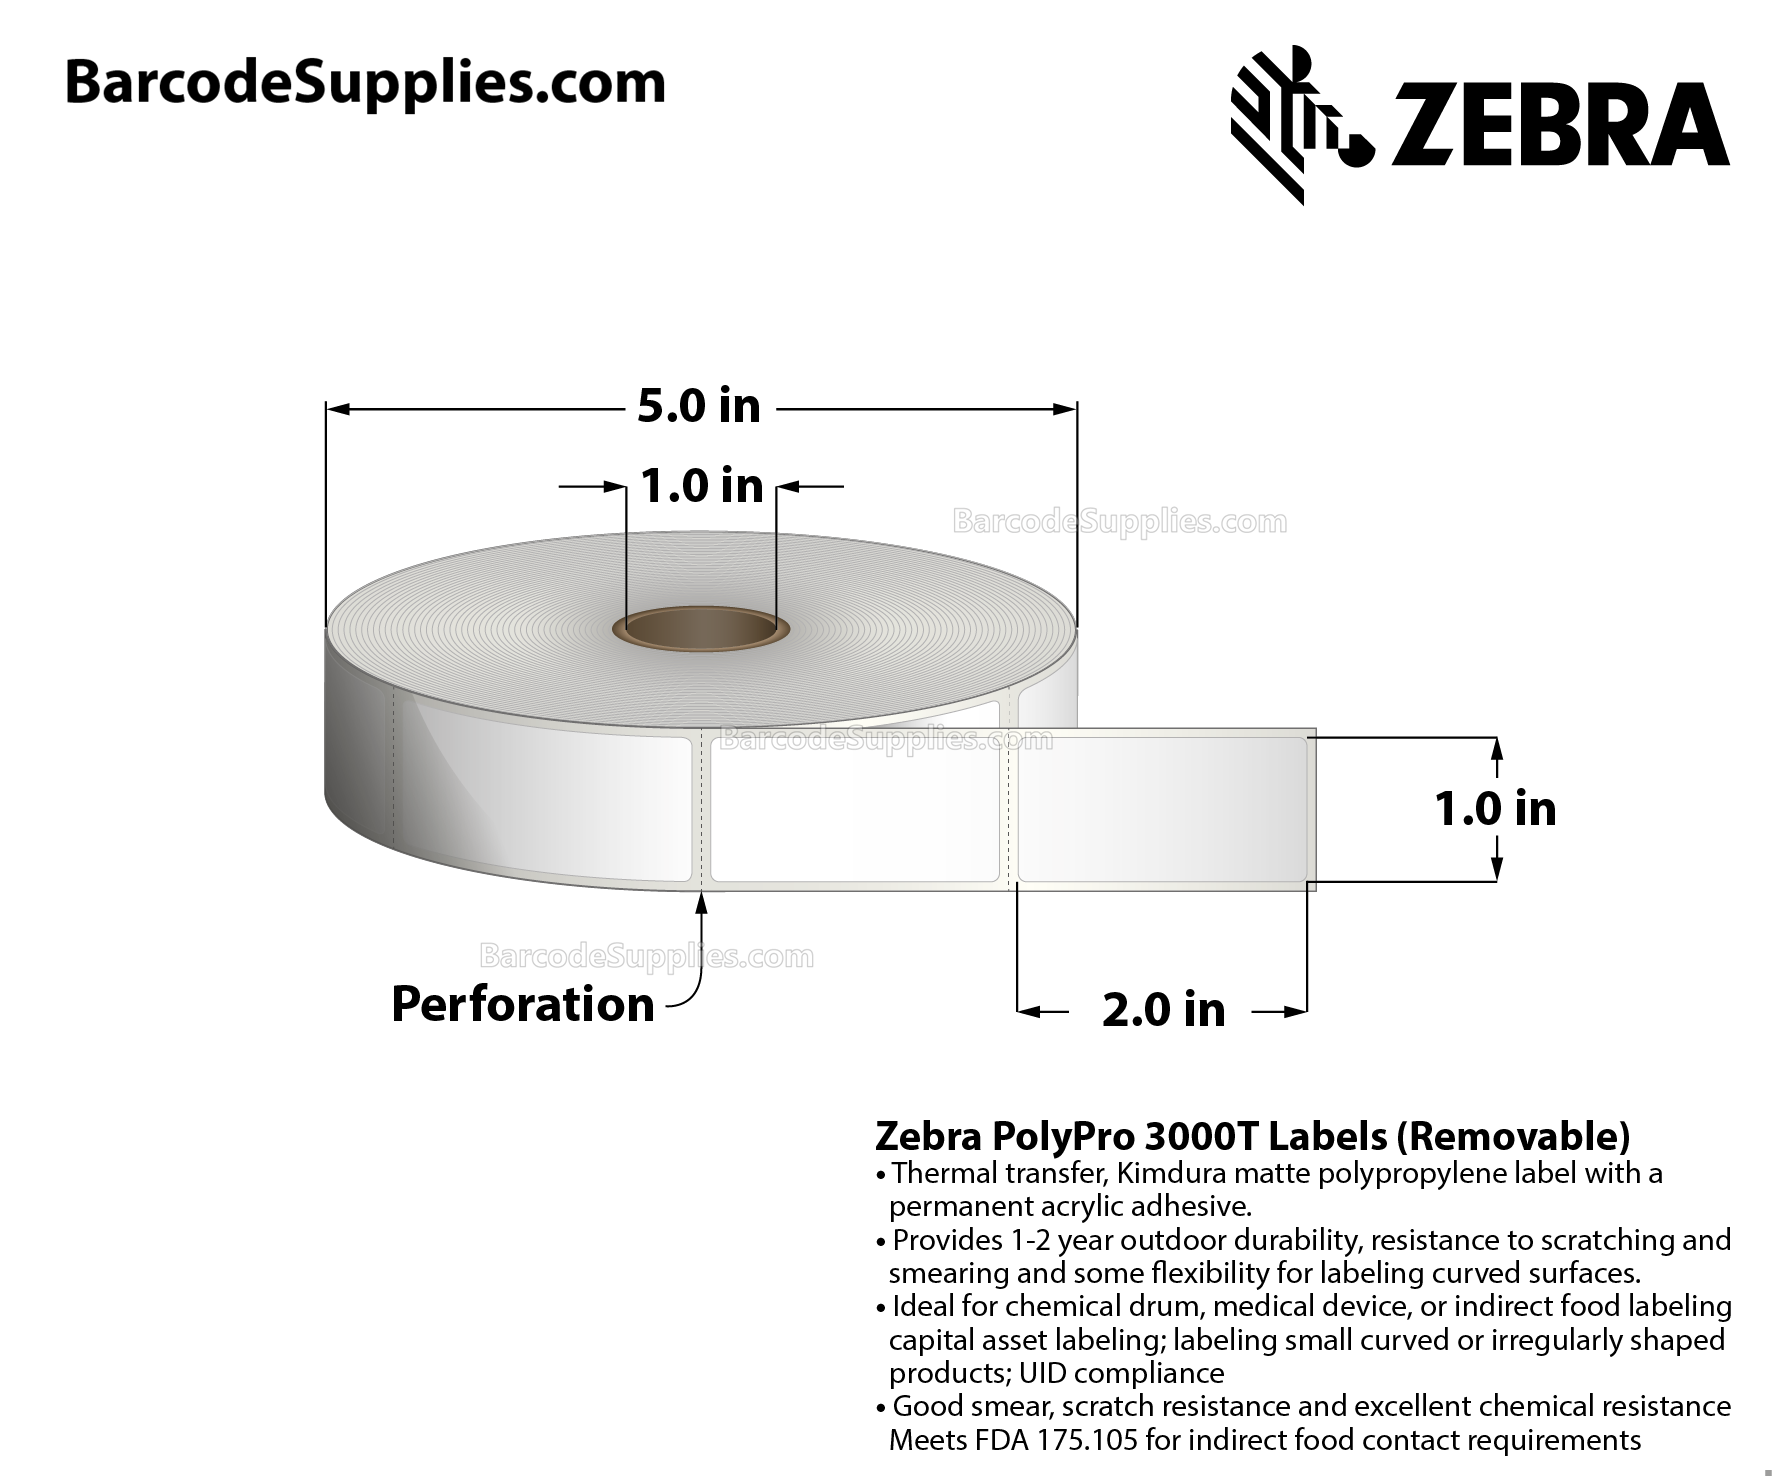 1 x 2 Thermal Transfer White PolyPro 4000T Removable Labels With Removable Adhesive - Perforated - 1025 Labels Per Roll - Carton Of 1 Rolls - 1025 Labels Total - MPN: 10022931